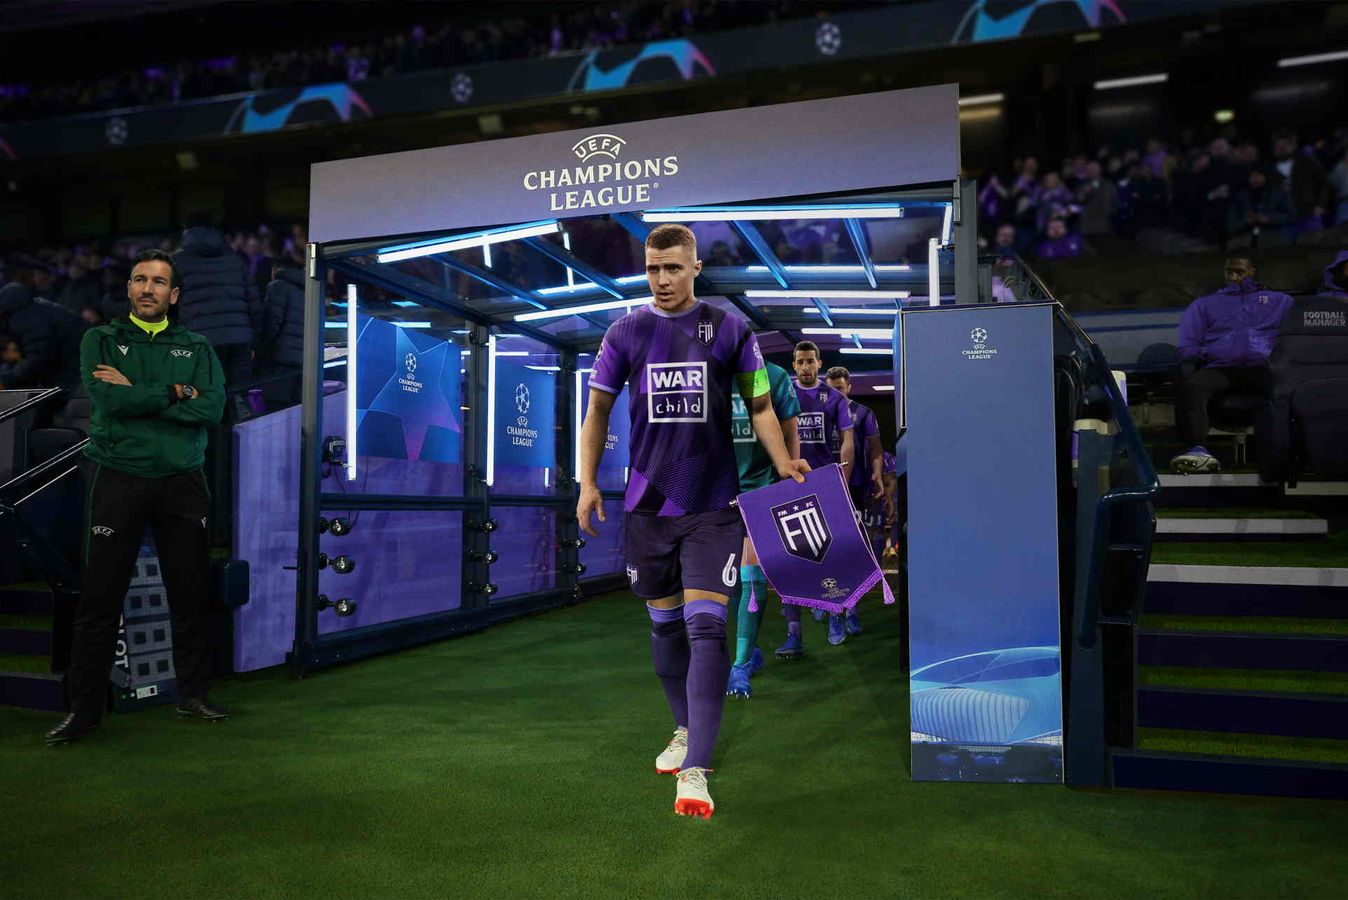 Football Manager 23 art with a player exiting the tunnel onto the pitch.